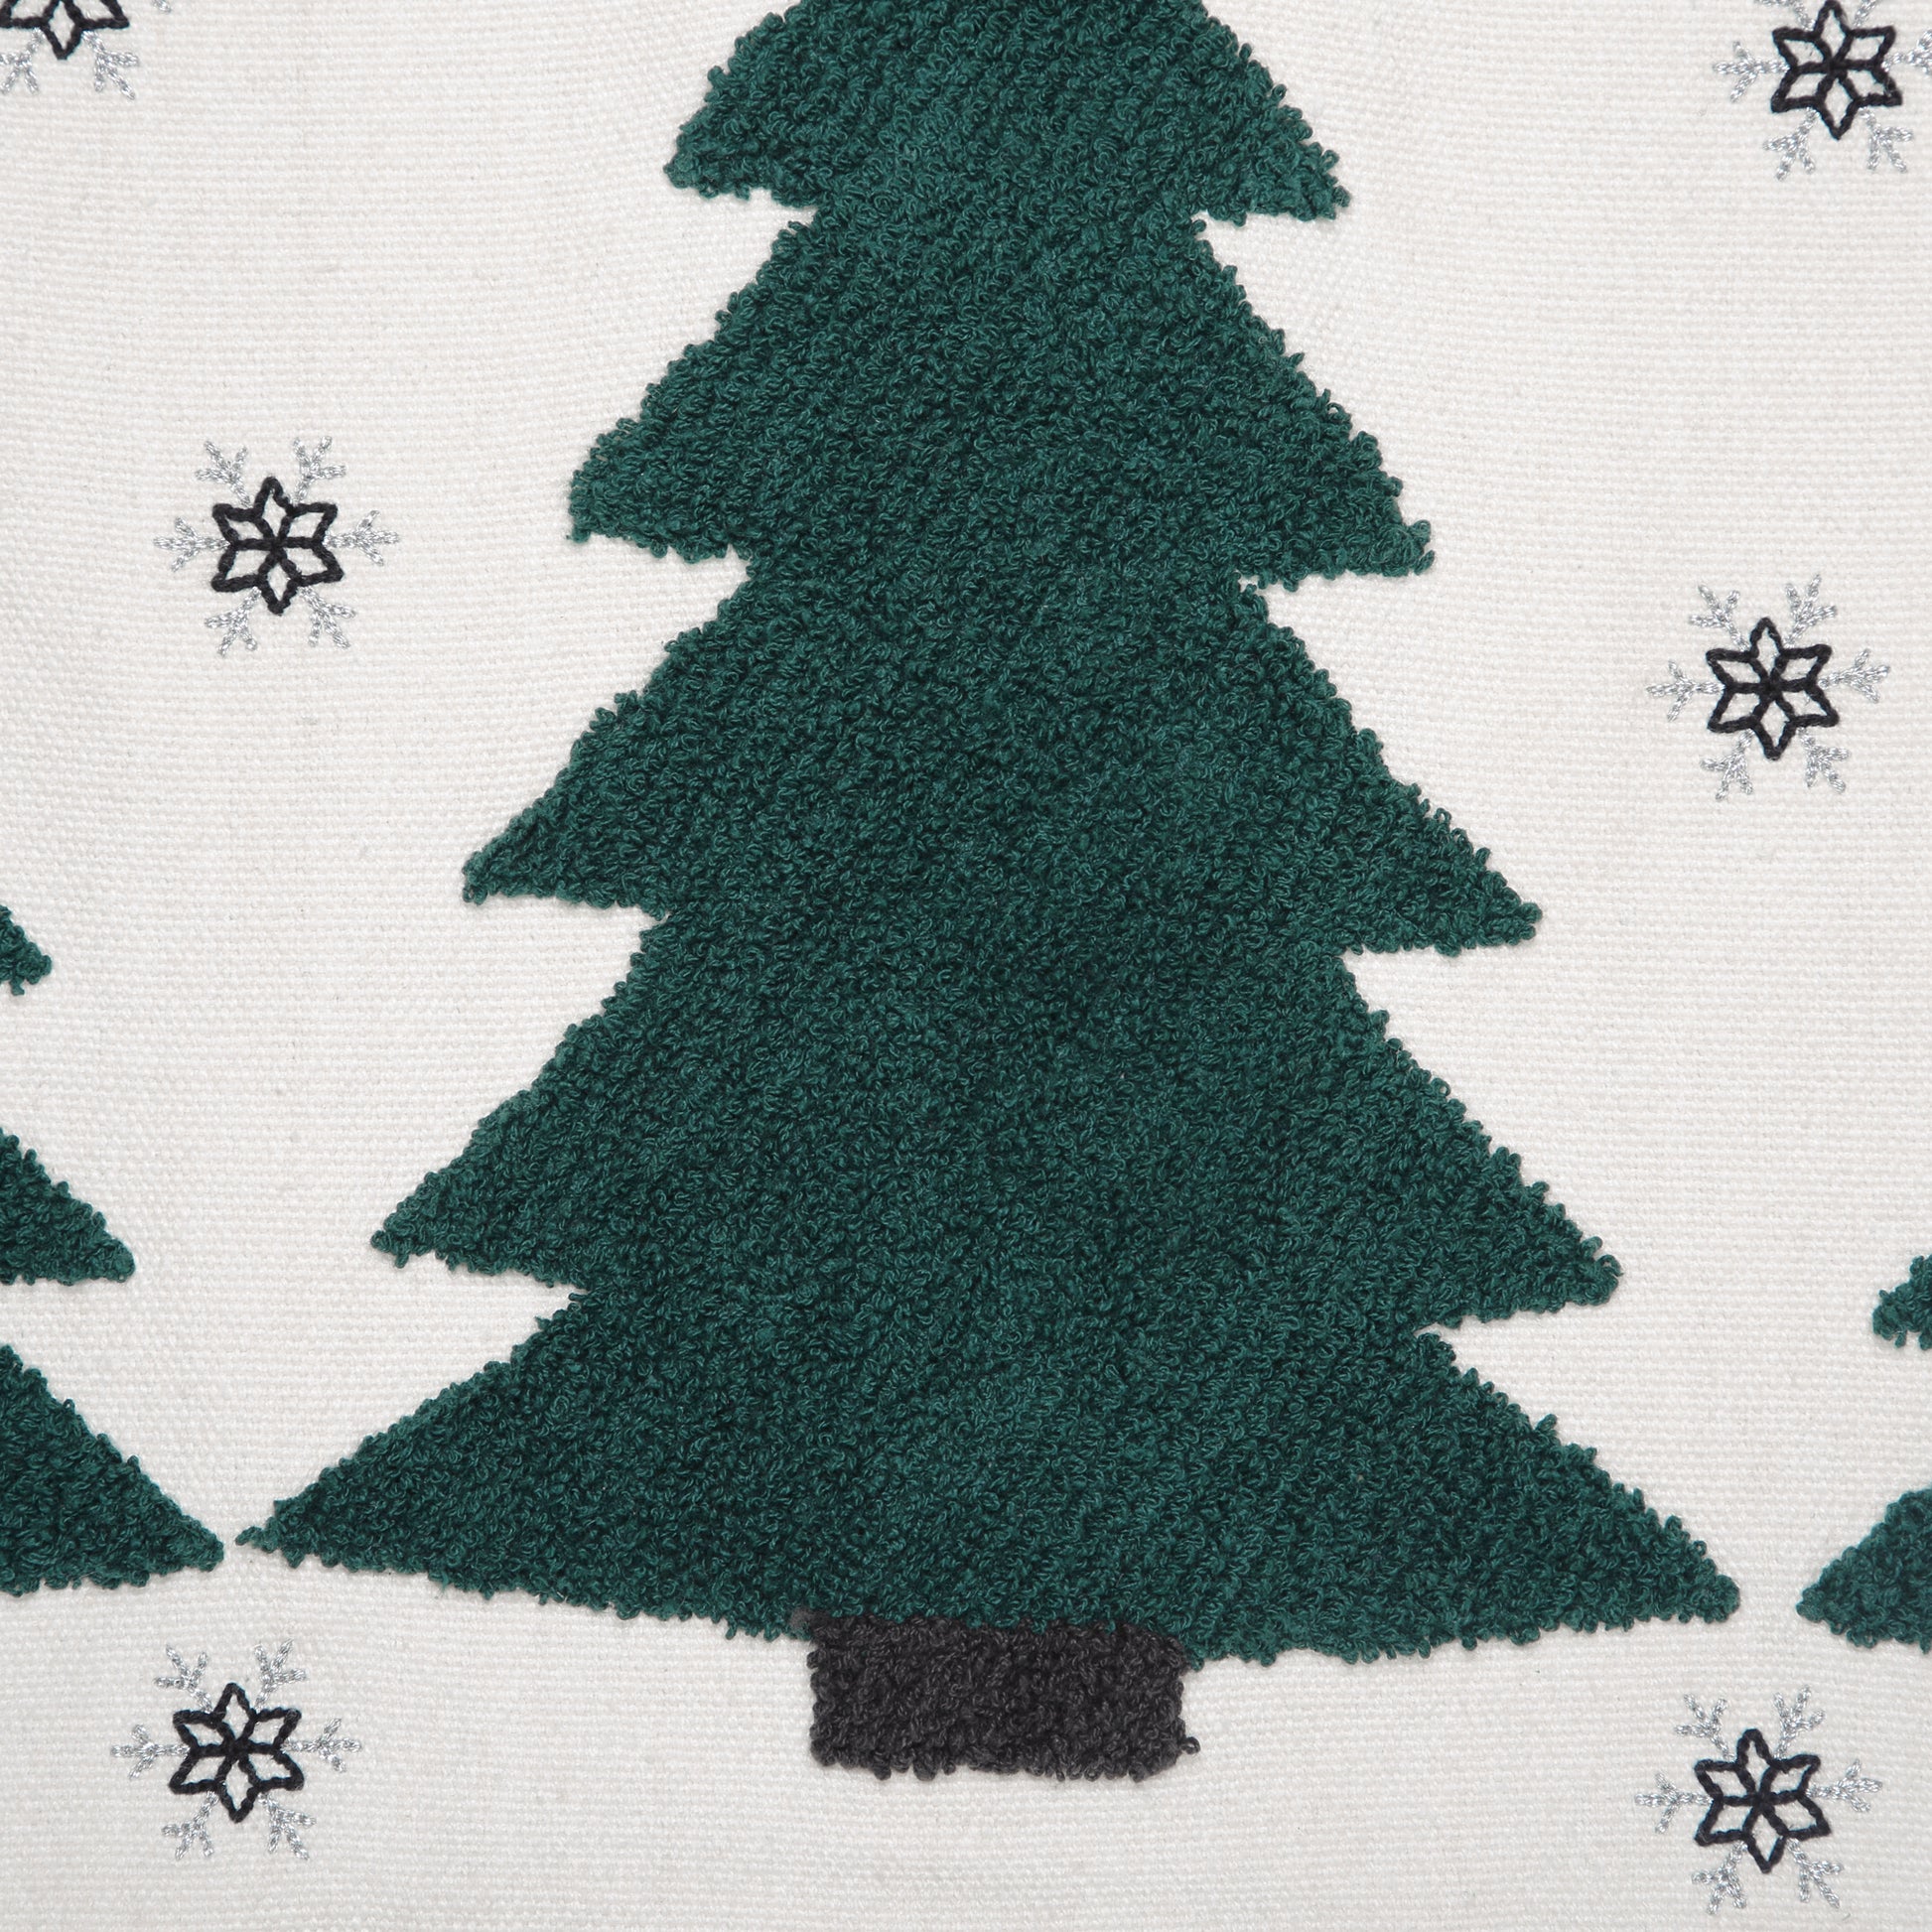 80424-Pine-Grove-Plaid-Embroidered-Trees-Pillow-14x22-image-5